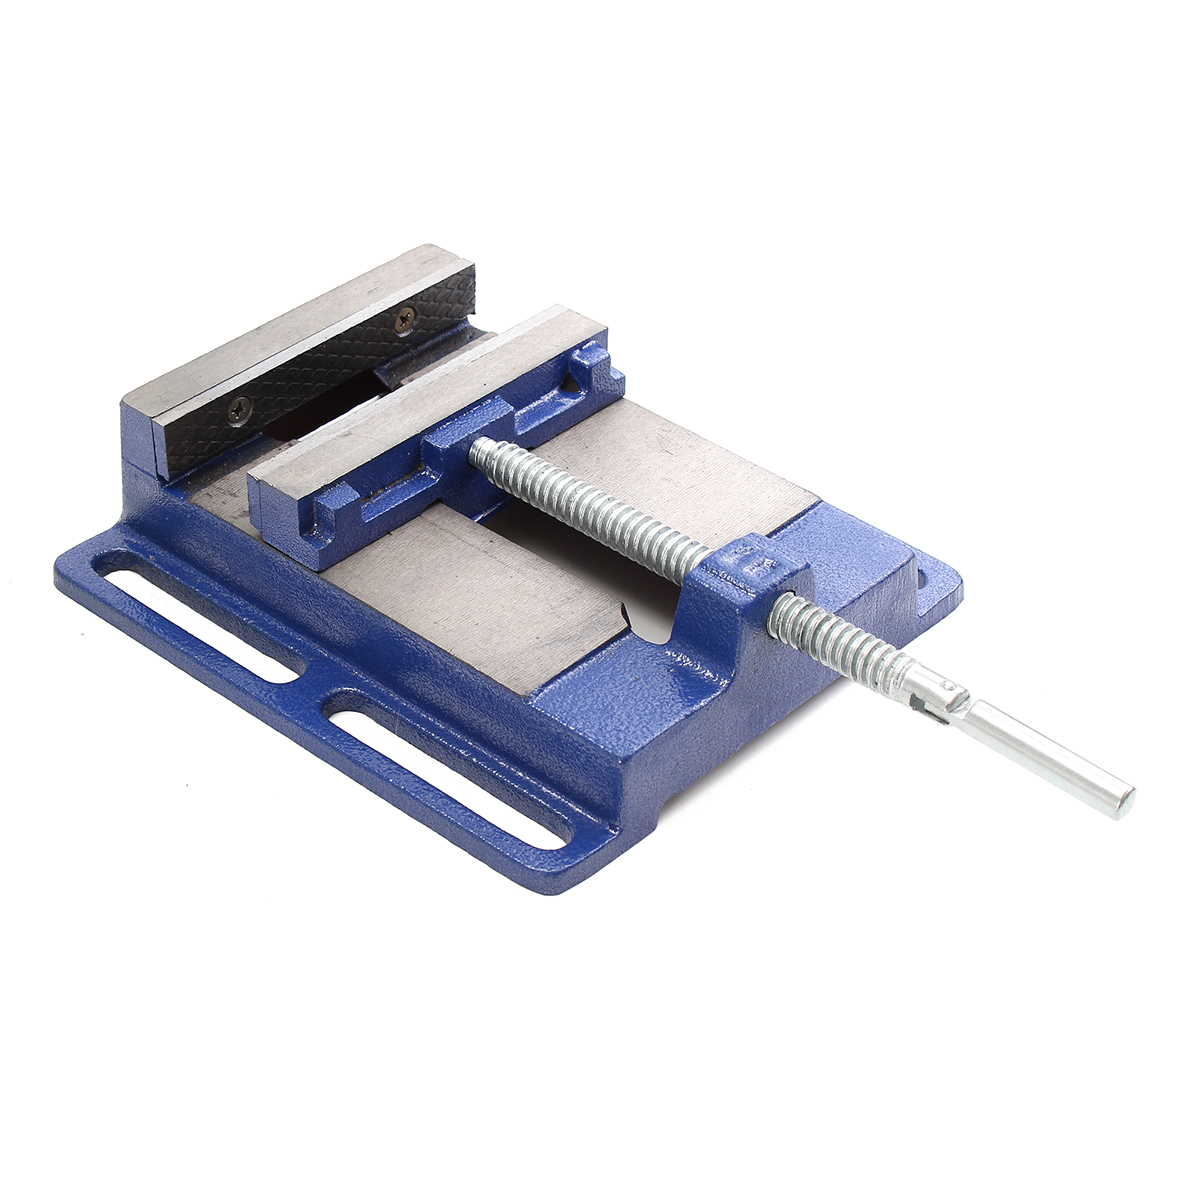 6-Inch-Heavy-Duty-JAW-Drill-Press-Vice-Bench-Clamp-Woodworking-Drilling-1682812-5